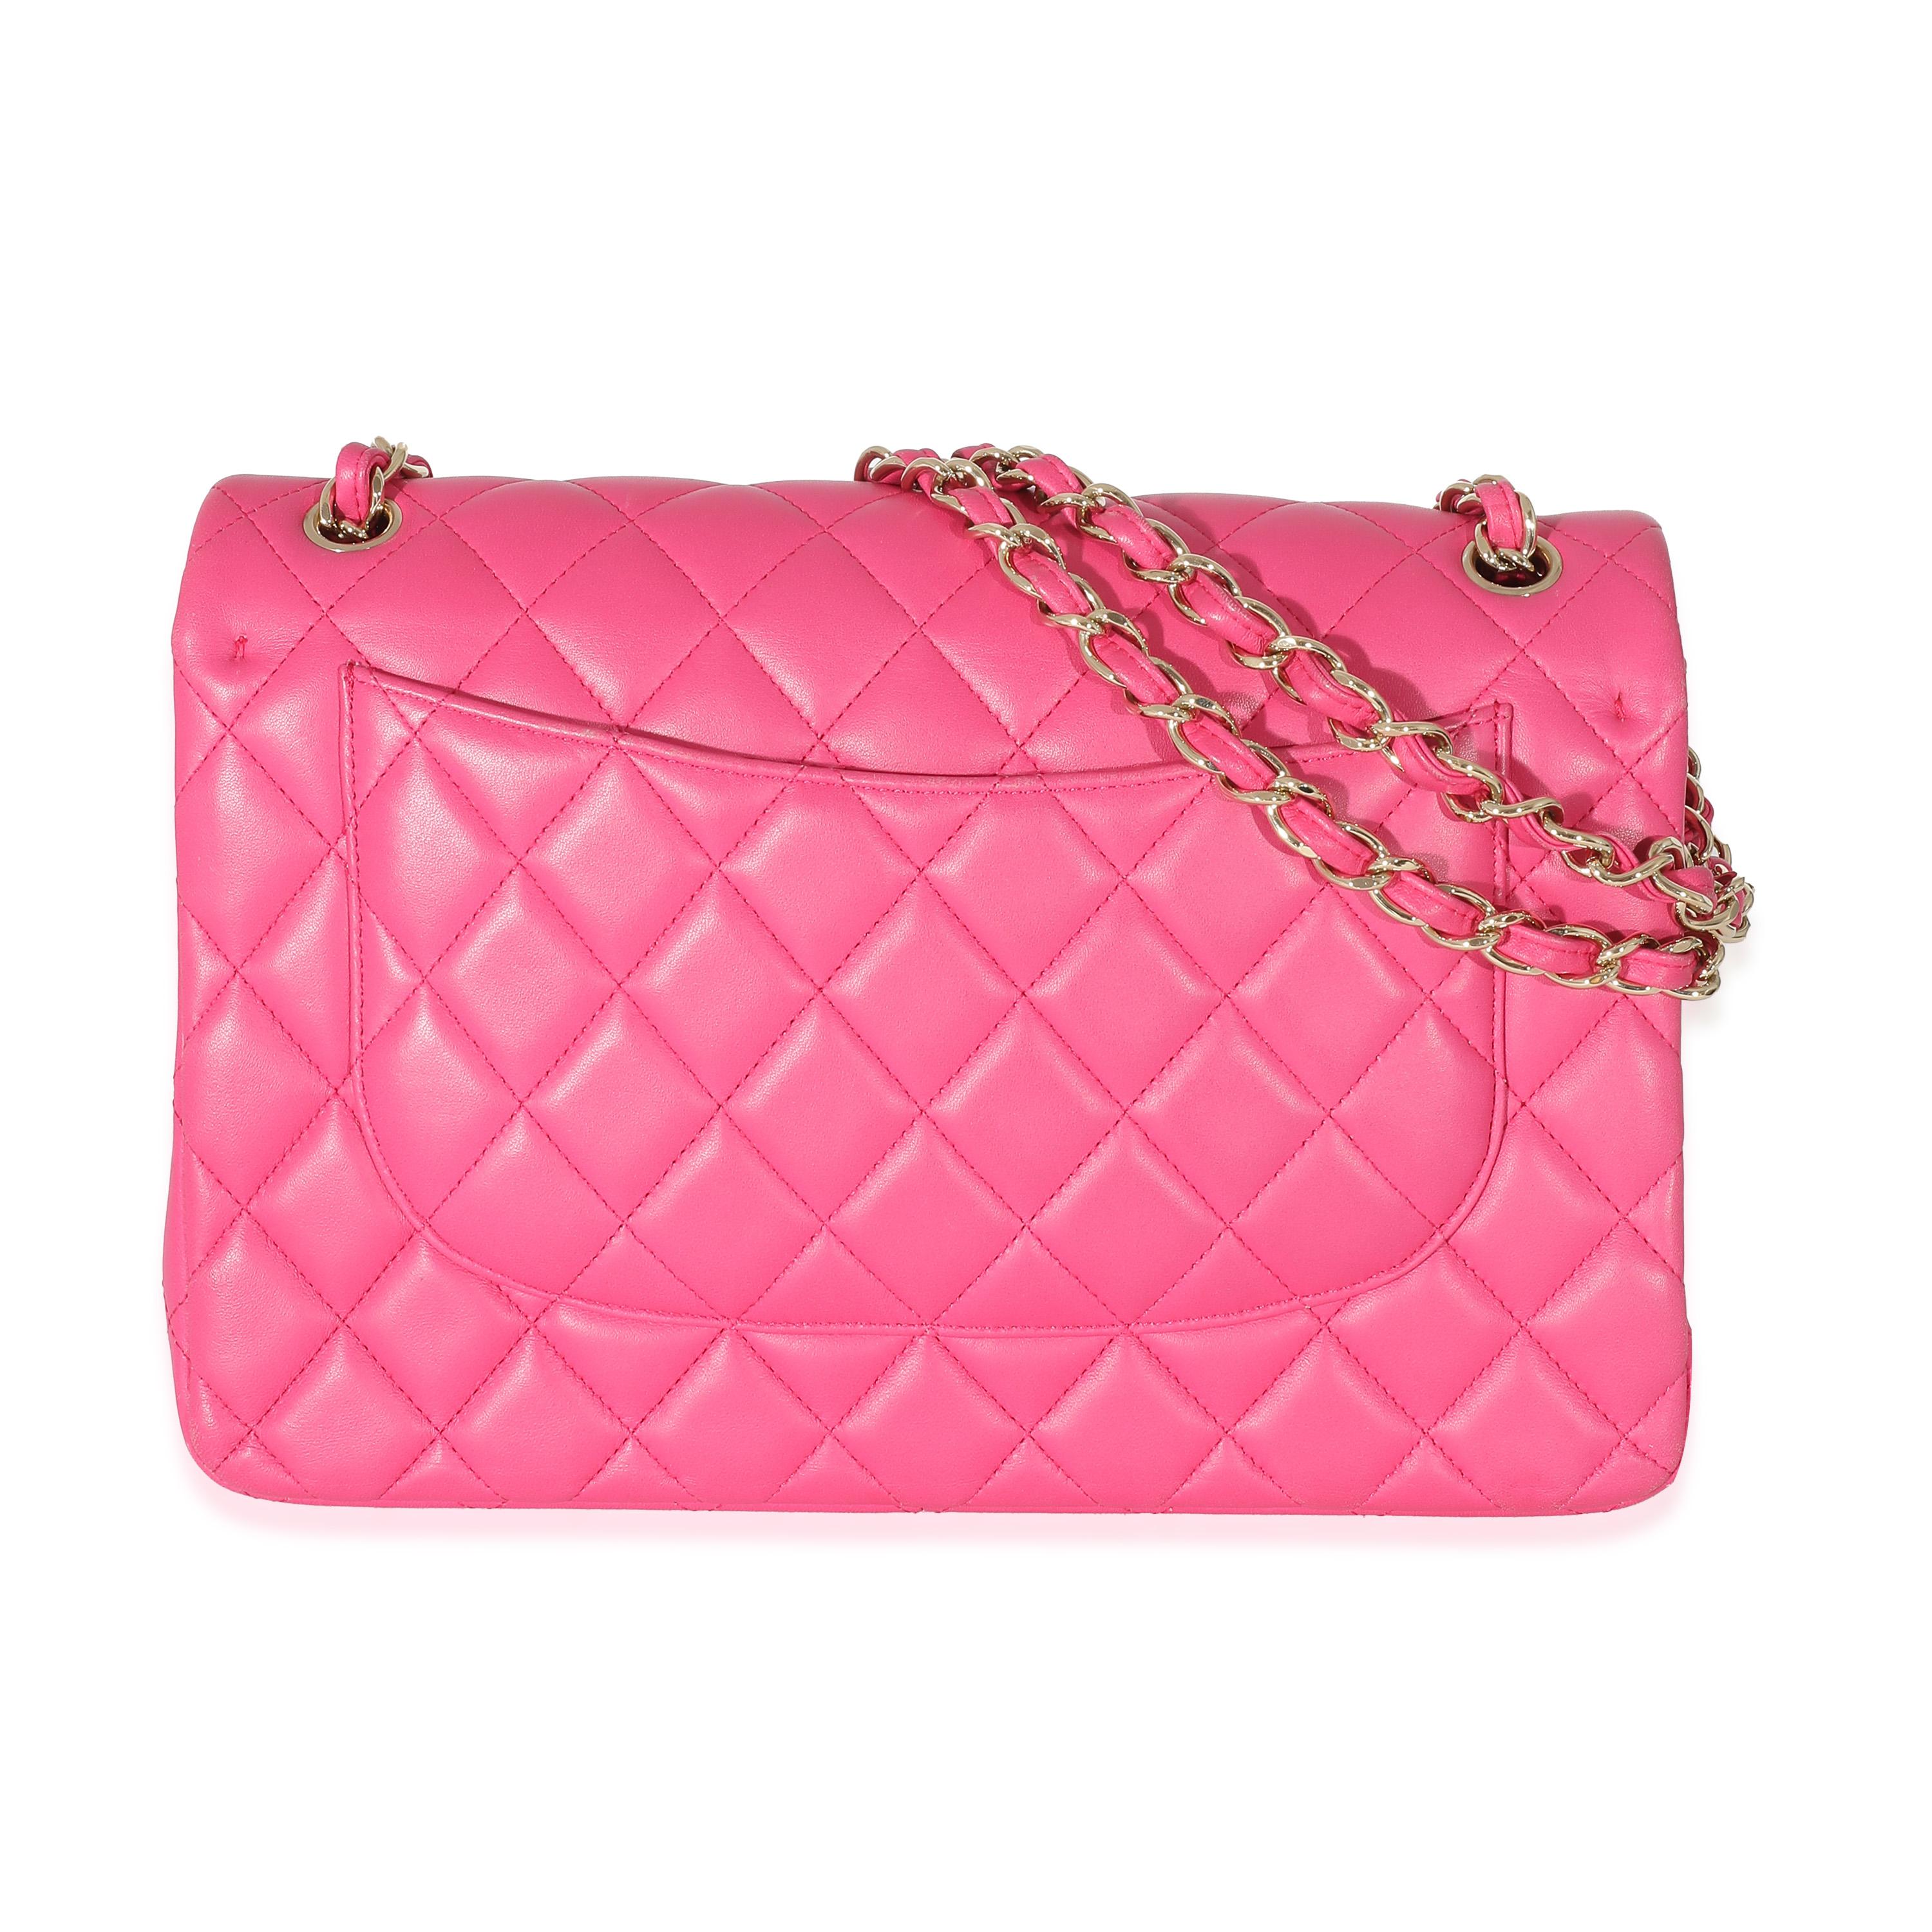 Listing Title: Chanel Pink Lambskin Jumbo Classic Double Flap Bag
SKU: 132920
Condition: Pre-owned 
Handbag Condition: Good
Condition Comments: Item is in good condition with apparent signs of wear. Serial number detached. Scuffing to corners and